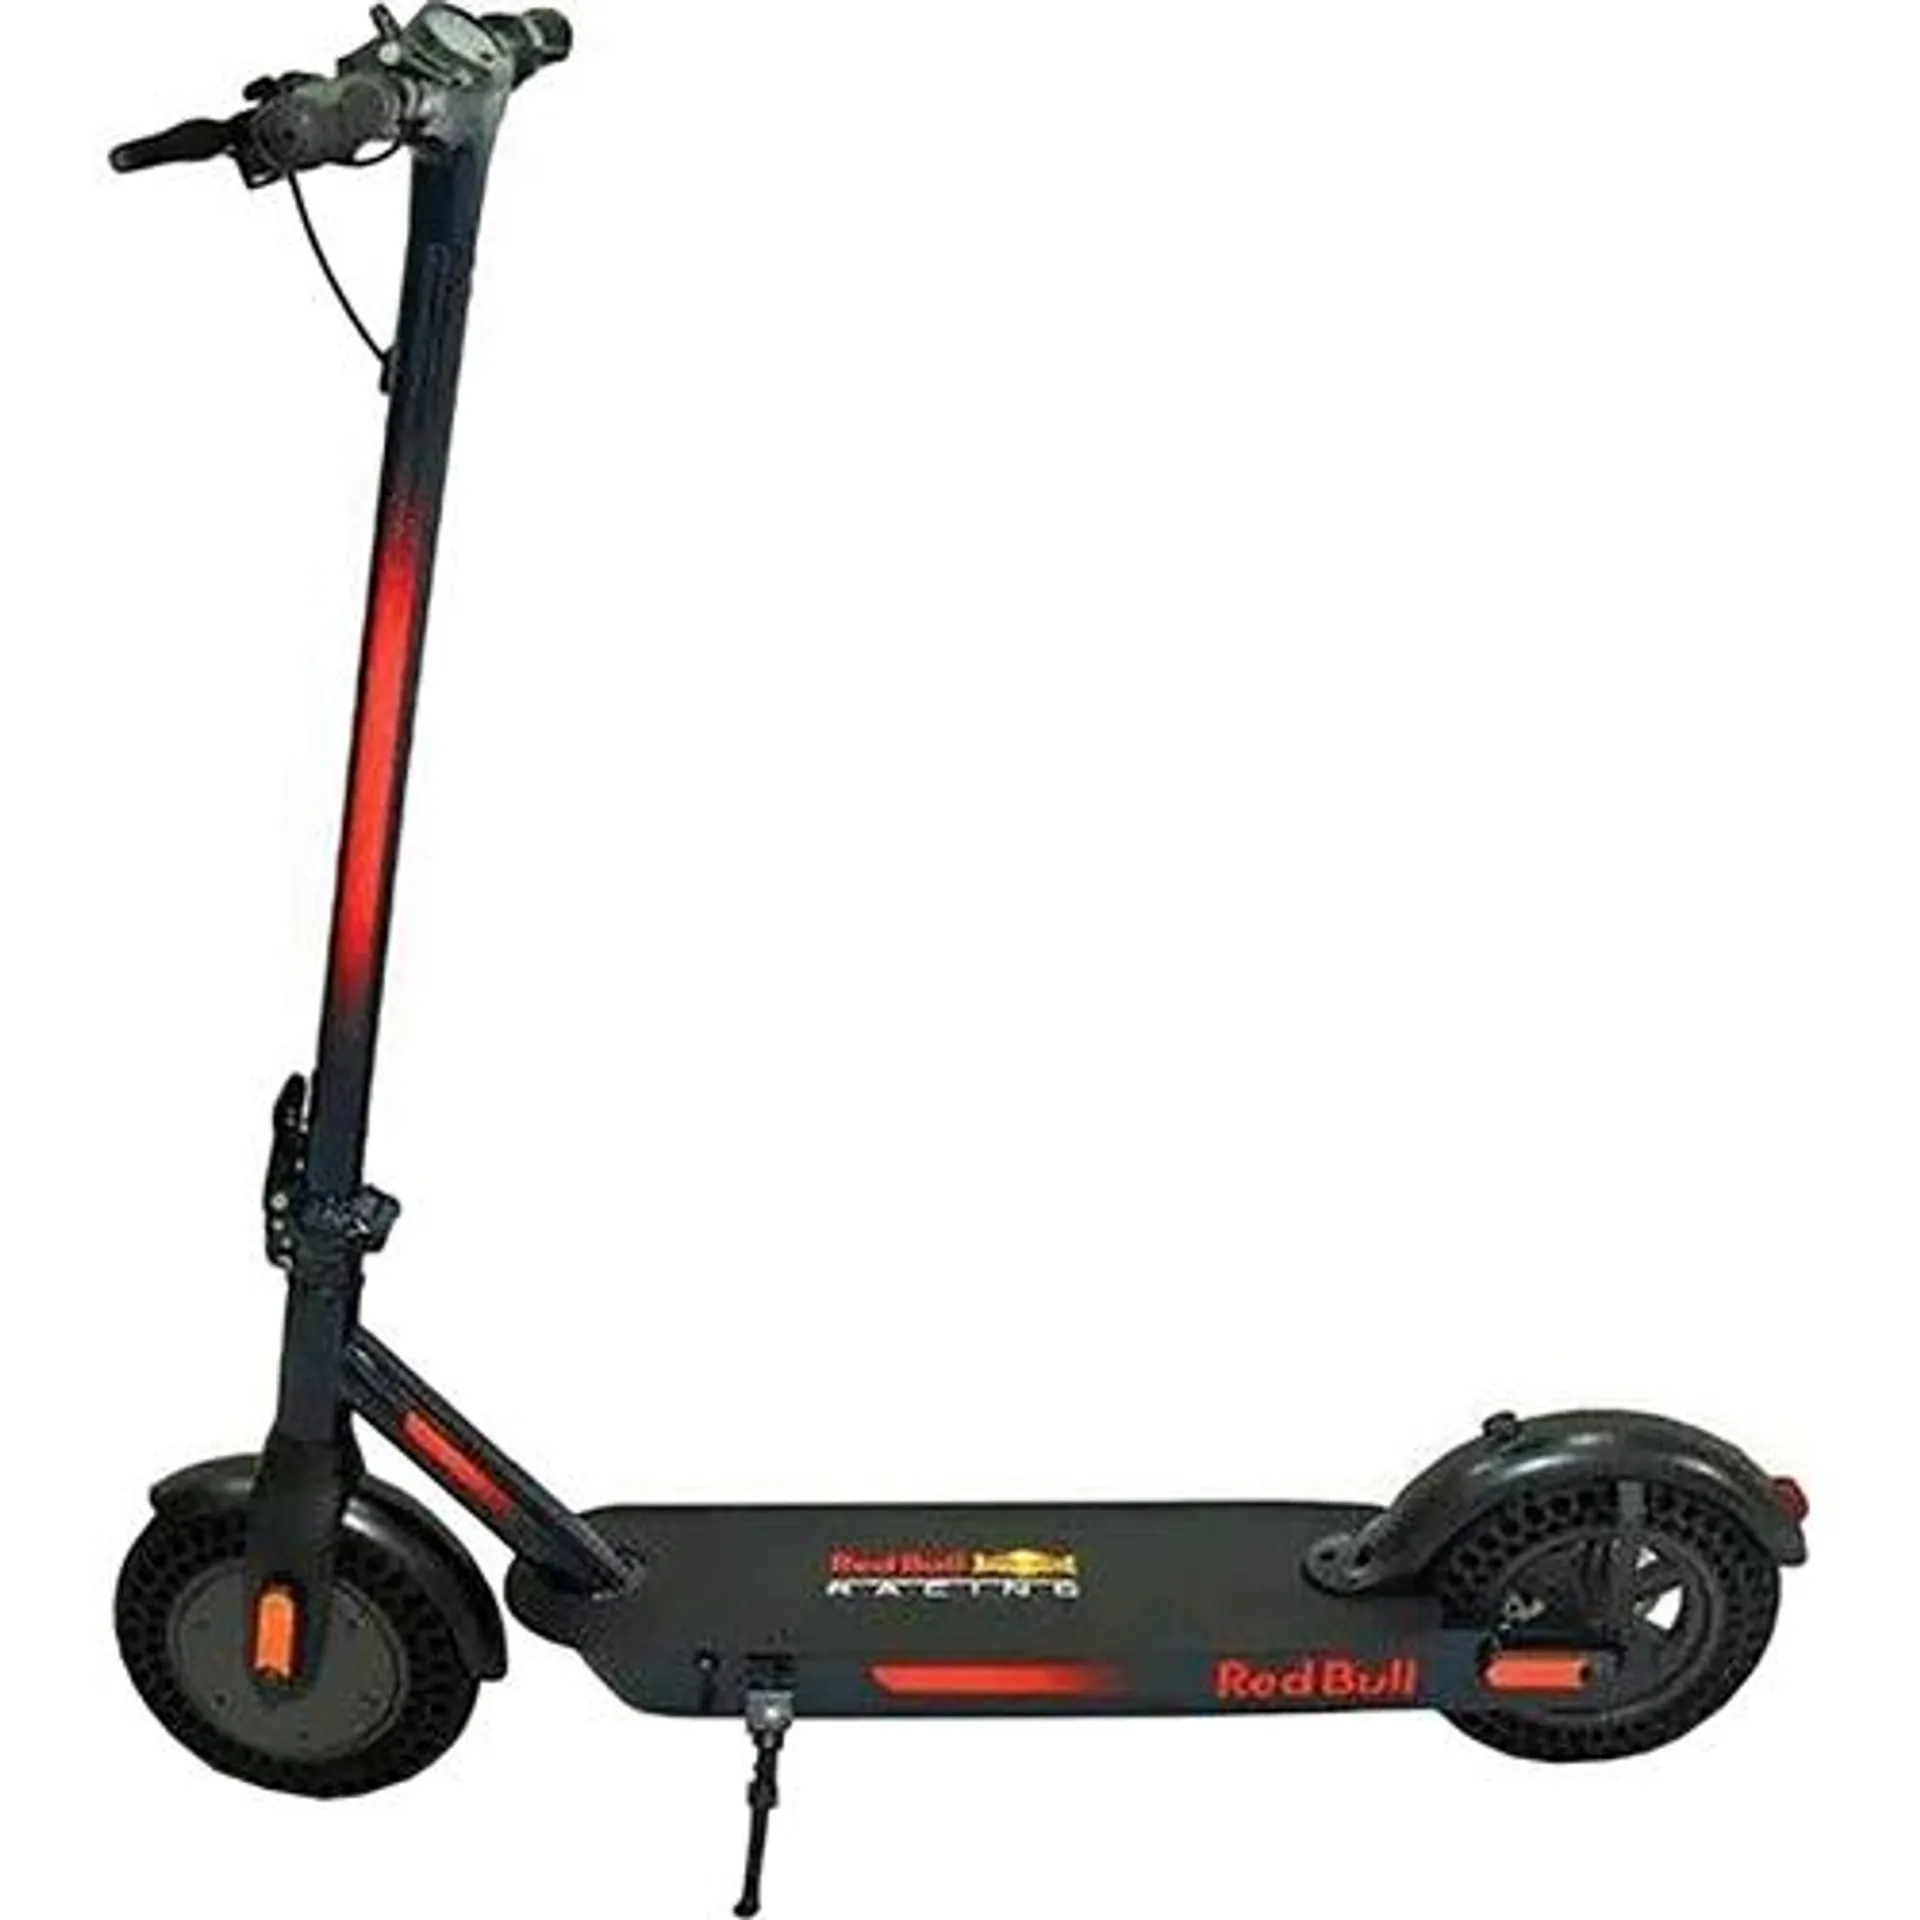 15.5MPH Electric Scooter with 25 Mile Range - Black/Red